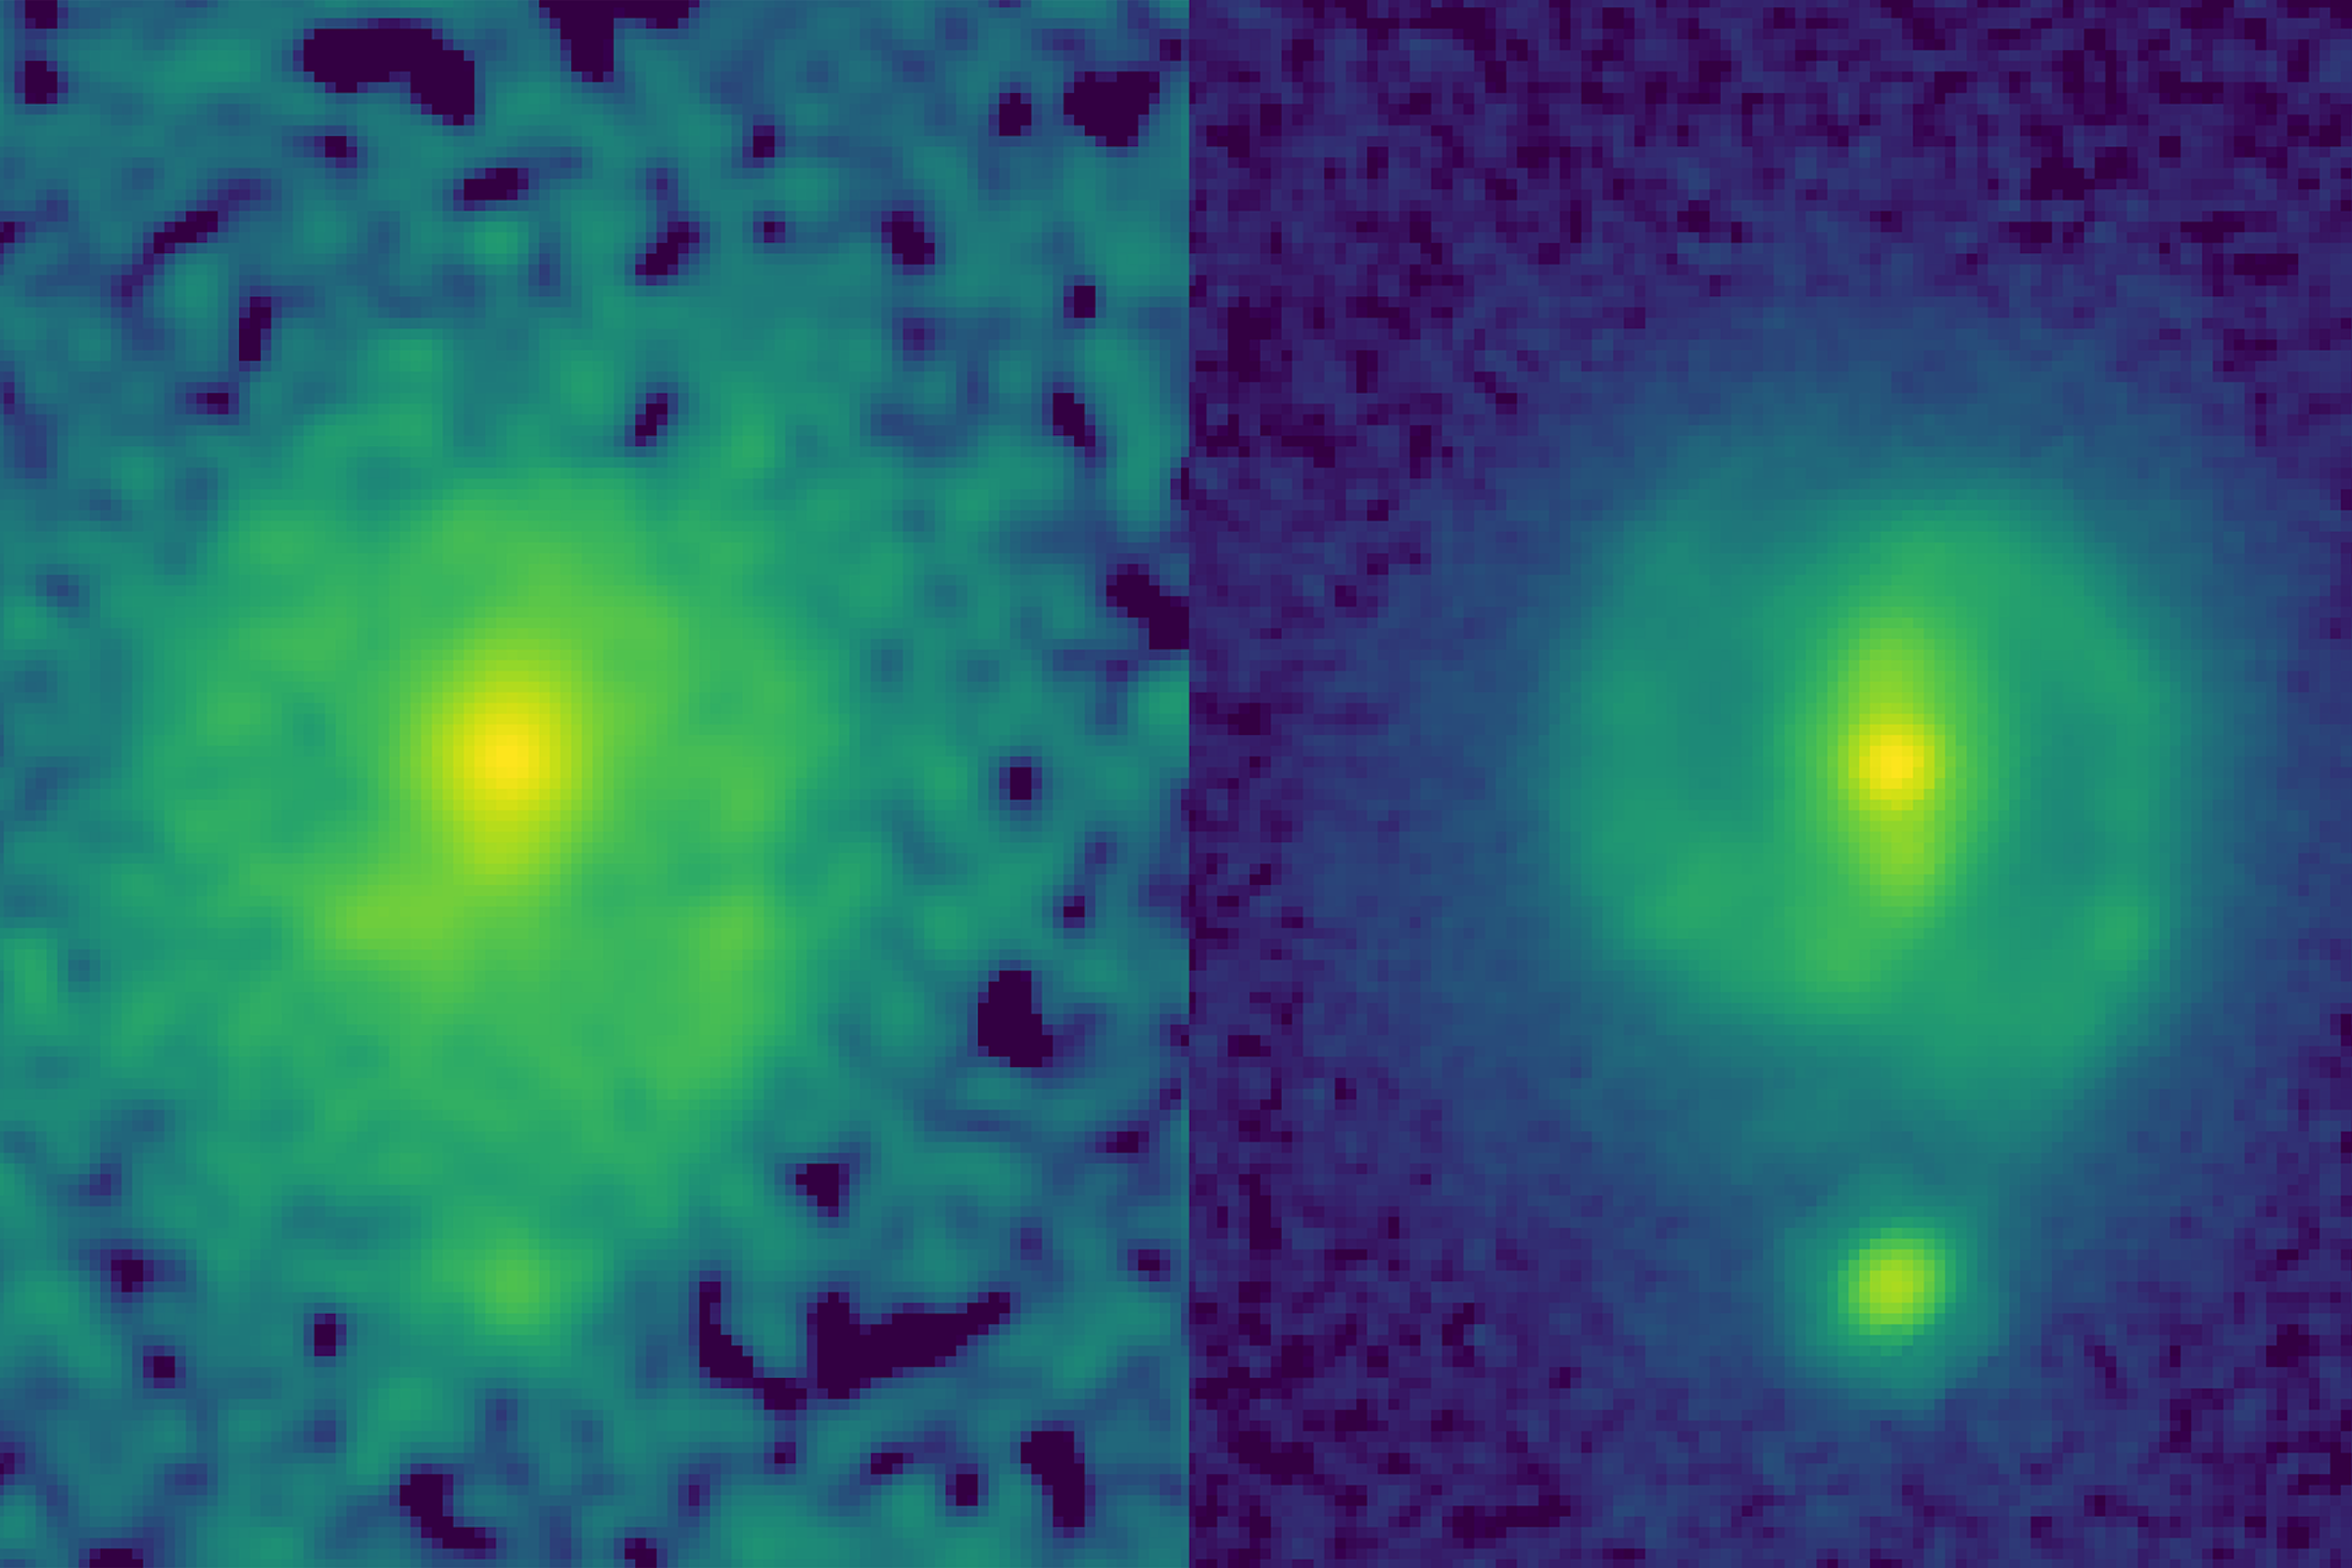 Two images of the same galaxy, one blurry, the other with crisp spiral arms and a central bar